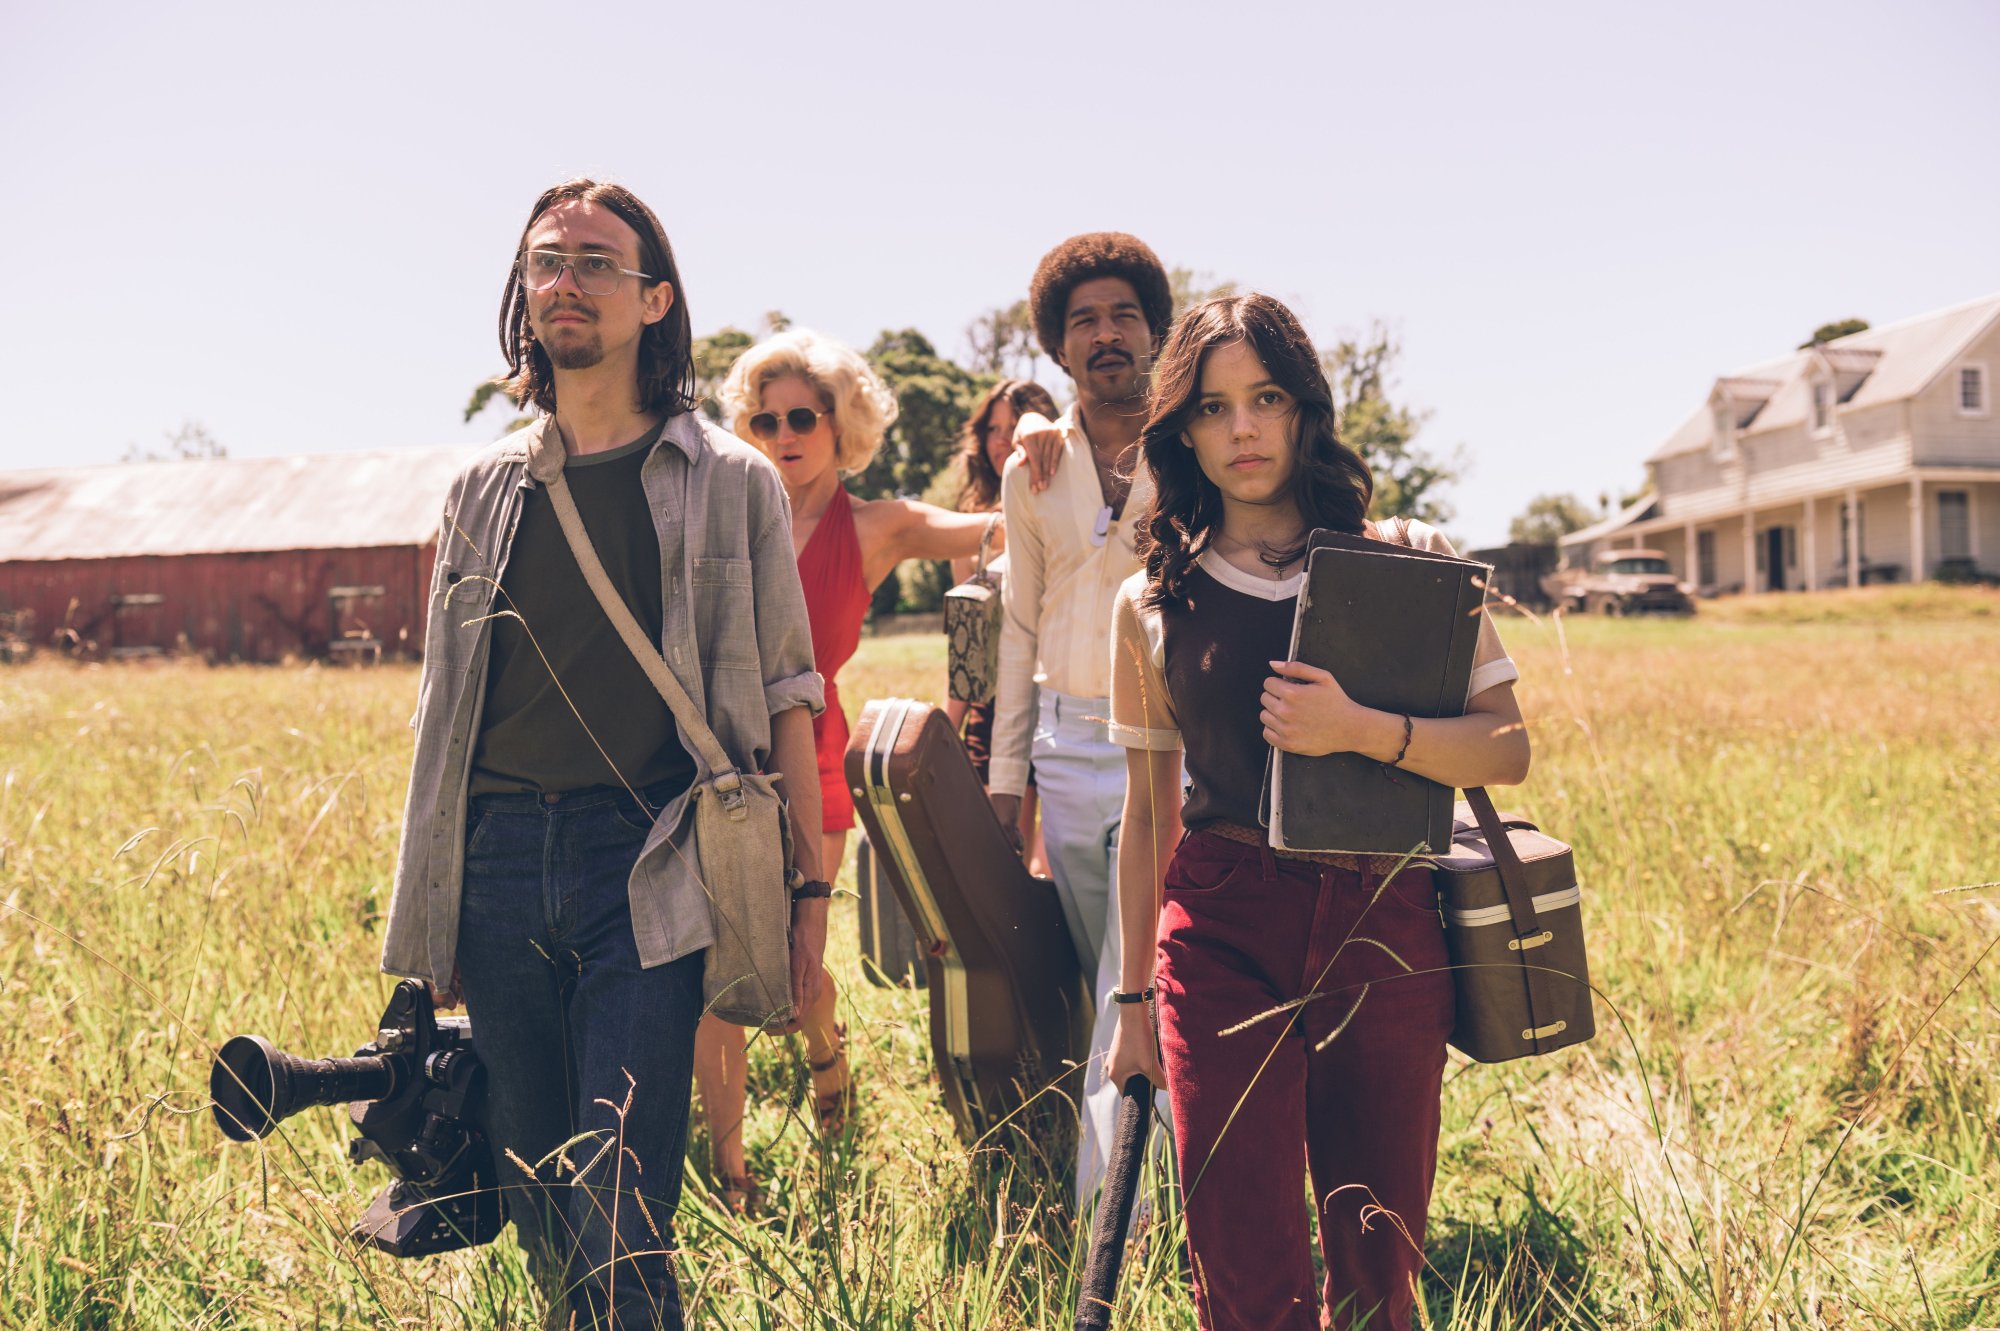 'X' Owen Campbell as RJ, Brittany Snow as Bobby-Lynne, Mia Goth as Maxine, Scott Mescudi as Jackson, and Jenna Ortega as Lorraine. walking in grass with a house in the background